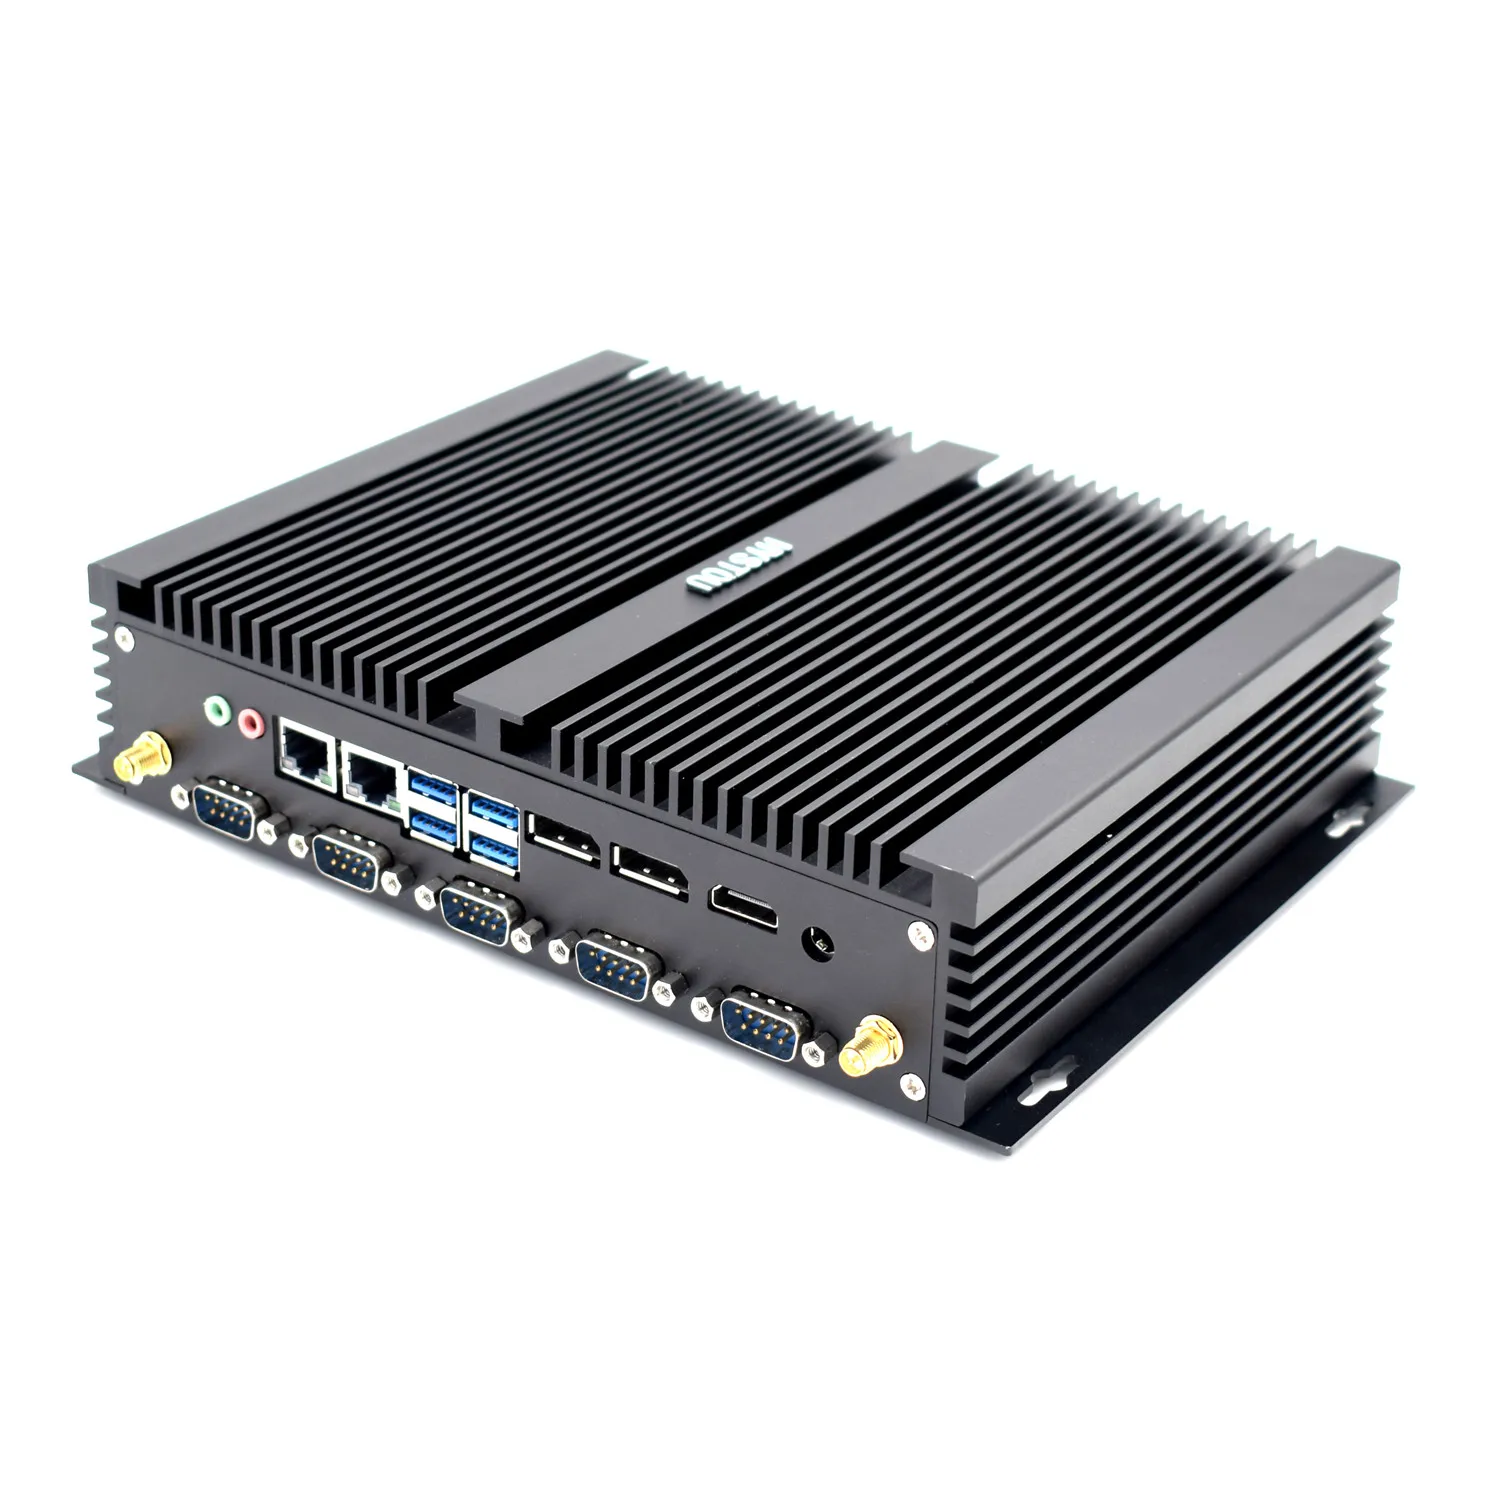 Core i5 8250u Industrial mini pc with 25 pin parallel printer port 3 output video 6 COM ports Fanless PC Small Form Computer